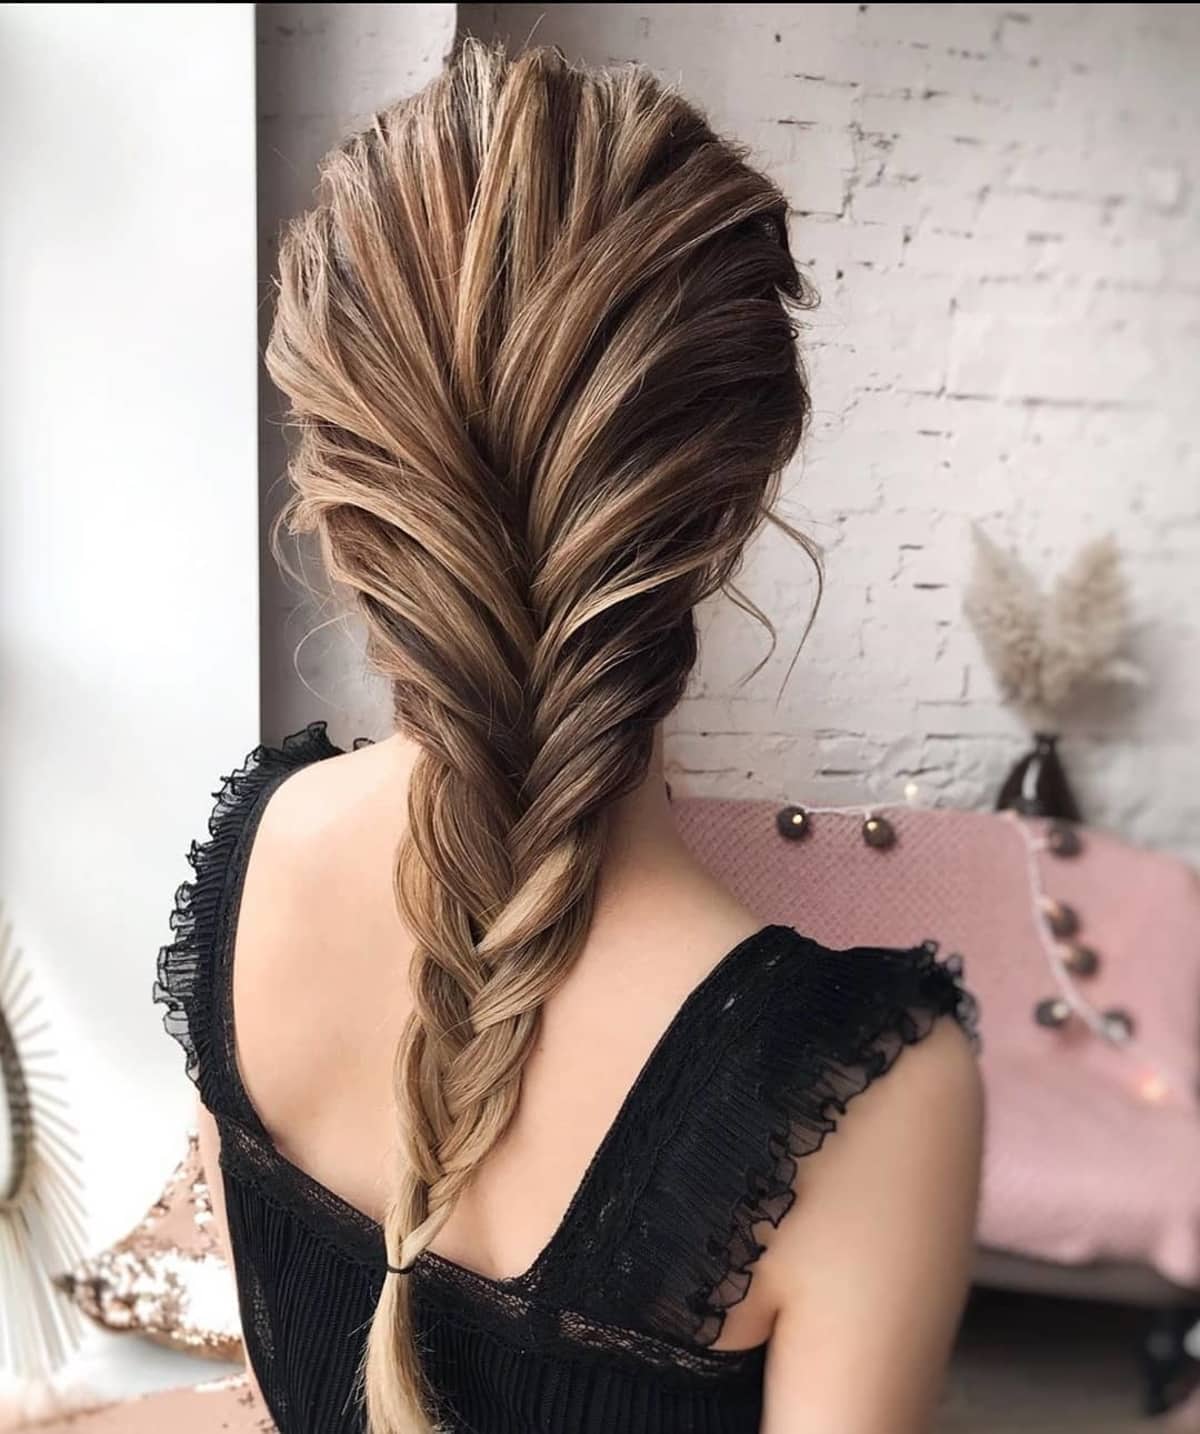 Ponytail with a braid for long thin hair